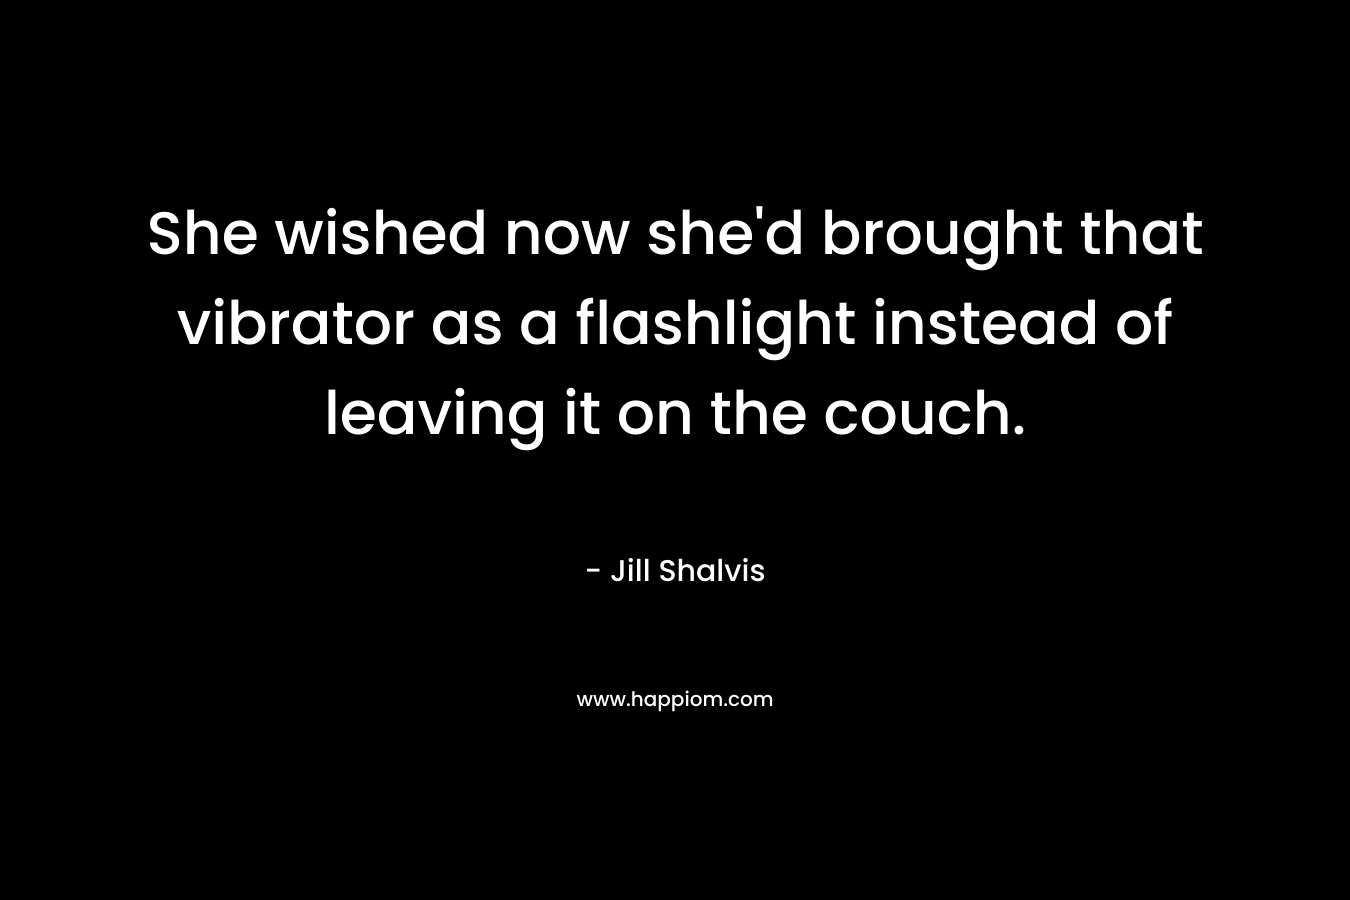 She wished now she’d brought that vibrator as a flashlight instead of leaving it on the couch. – Jill Shalvis